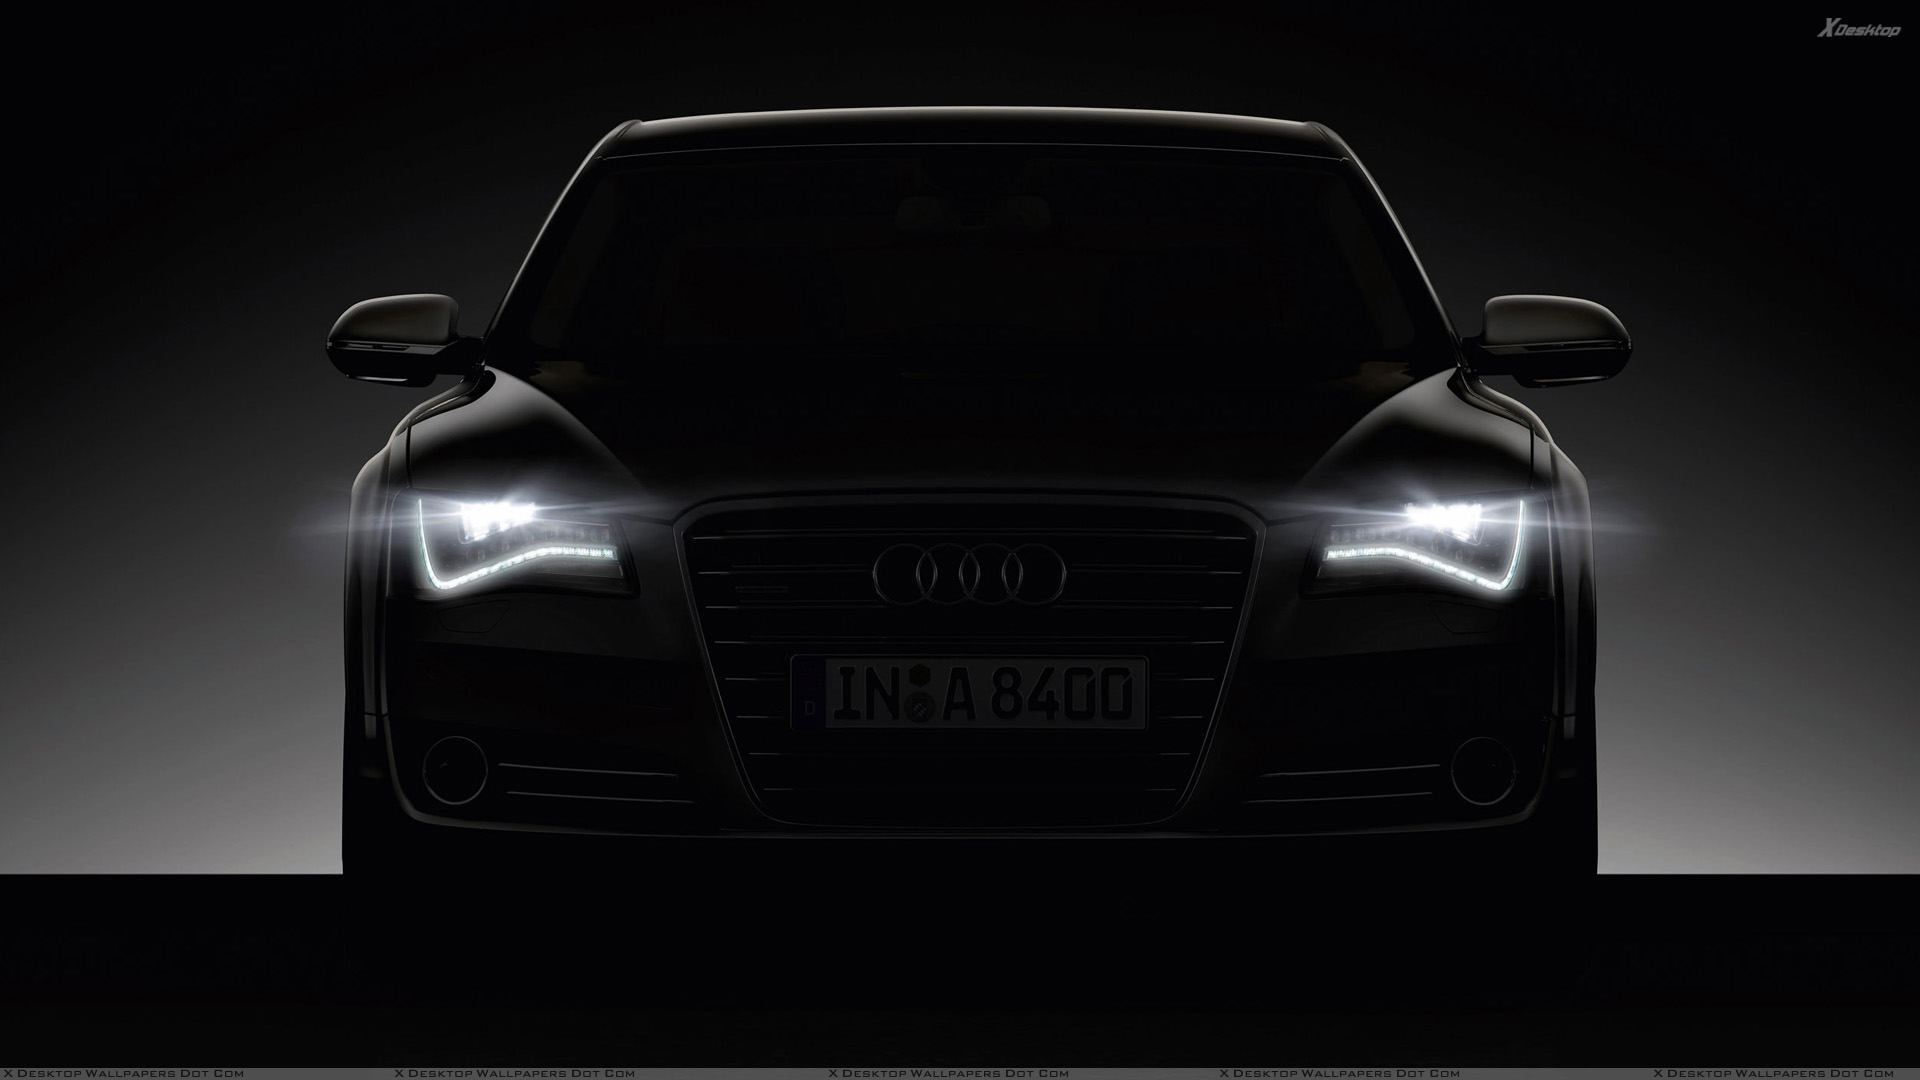 Front Headlights On Audi A8 Wallpaper